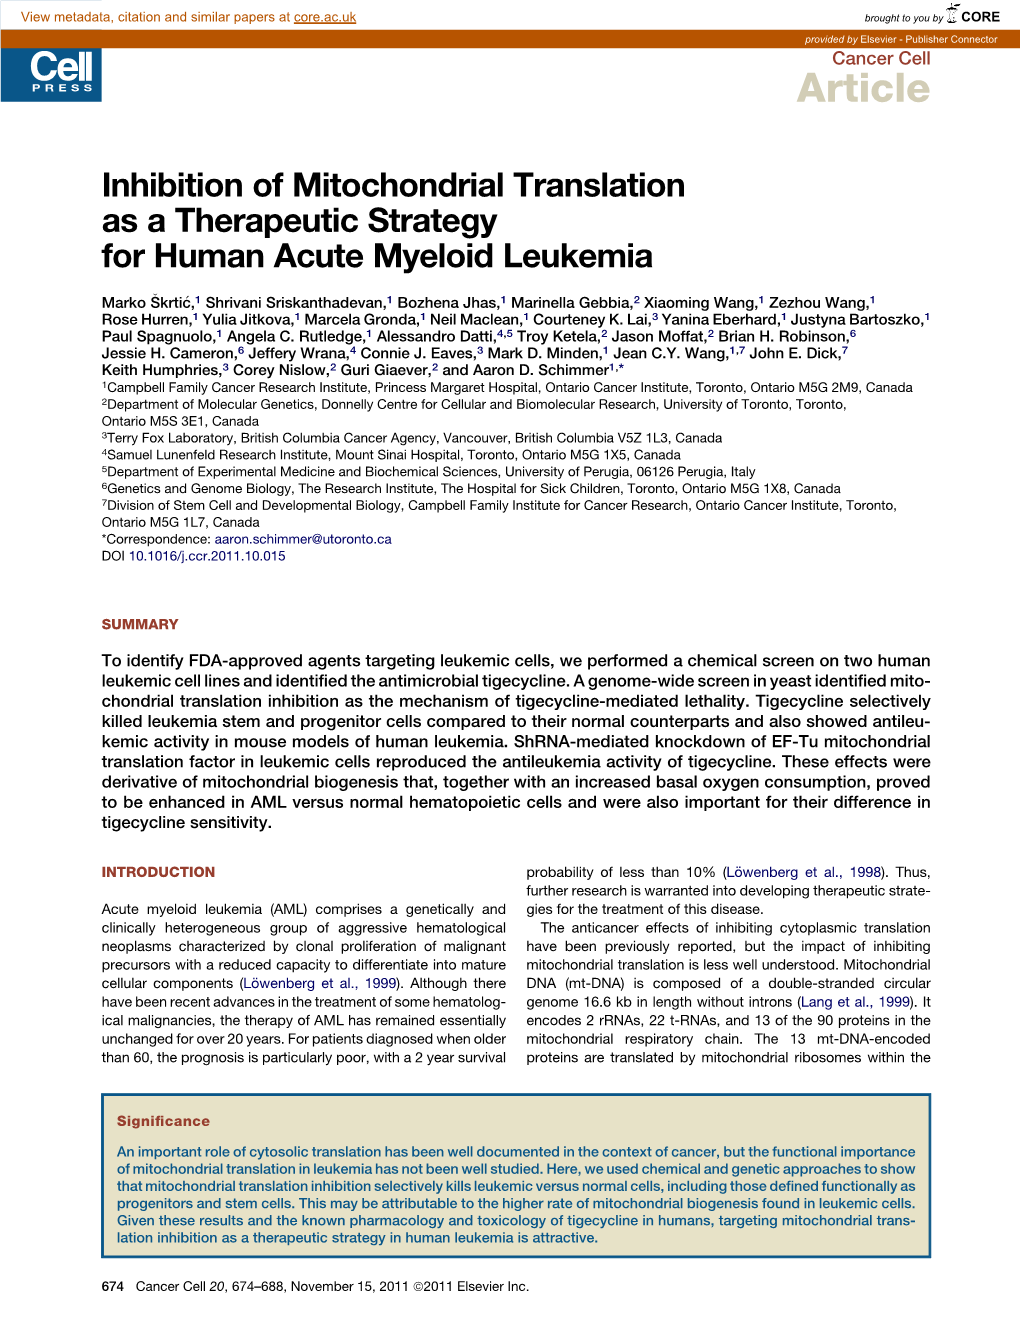 Inhibition of Mitochondrial Translation As a Therapeutic Strategy